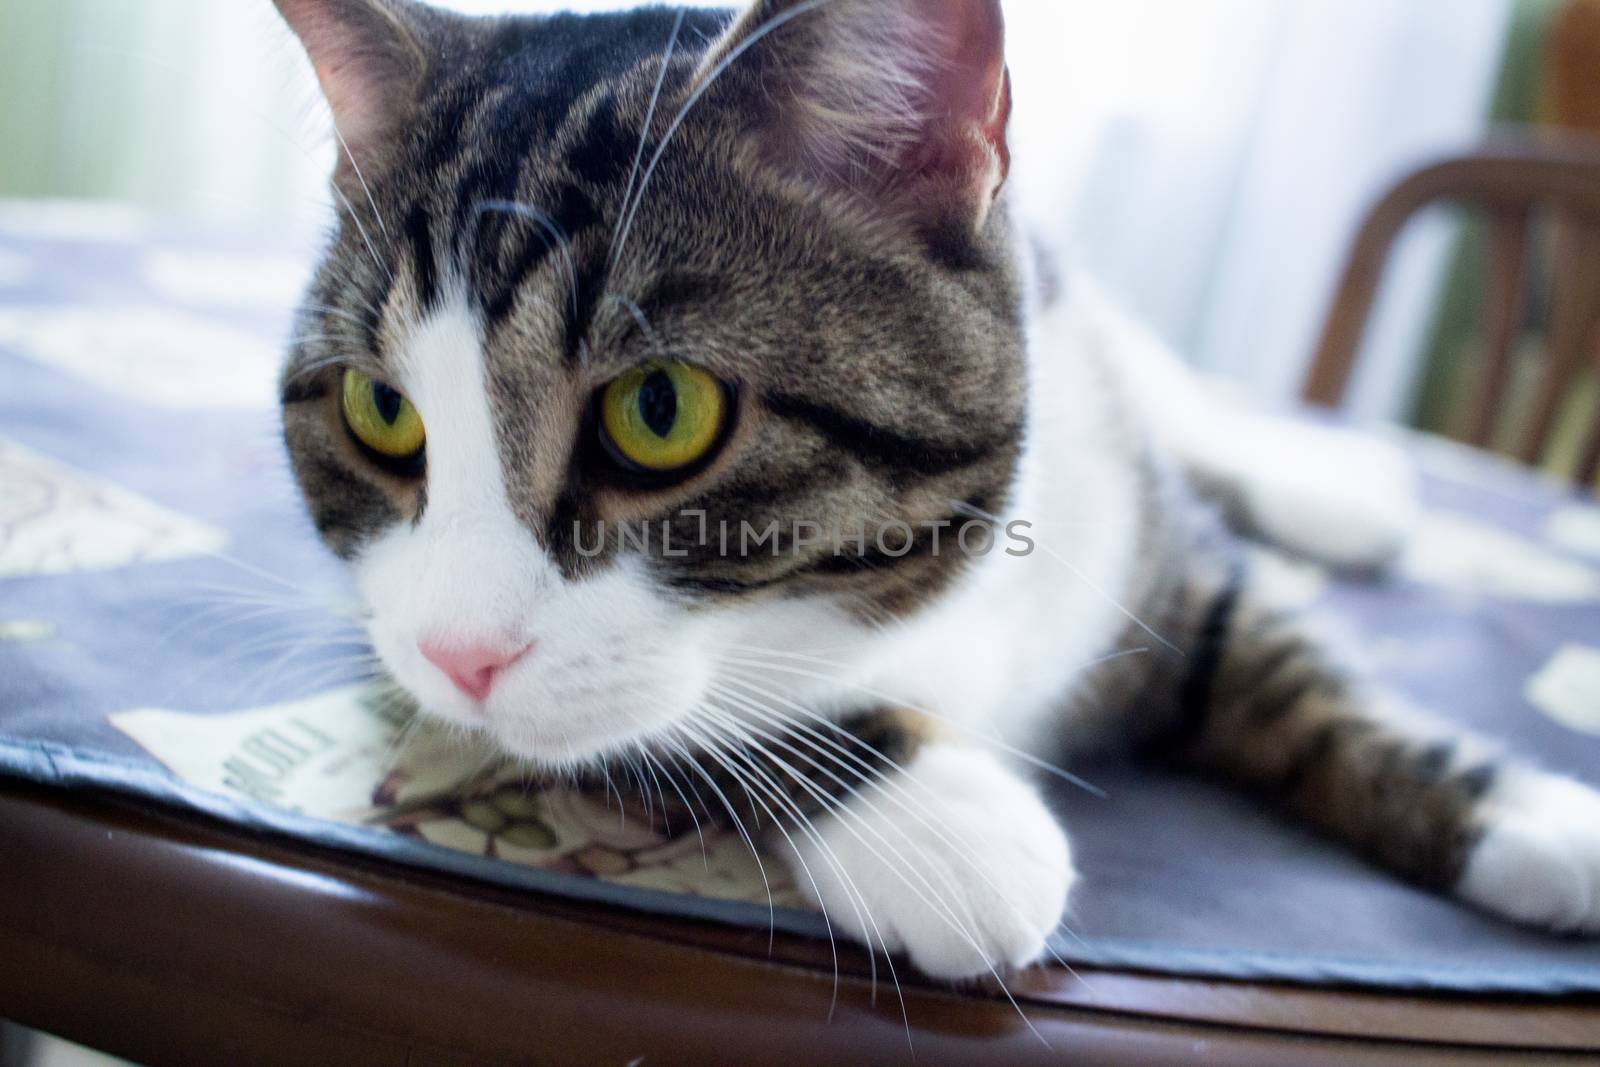 Domestic pet cat with bright green eyes poses on table by VeraVerano